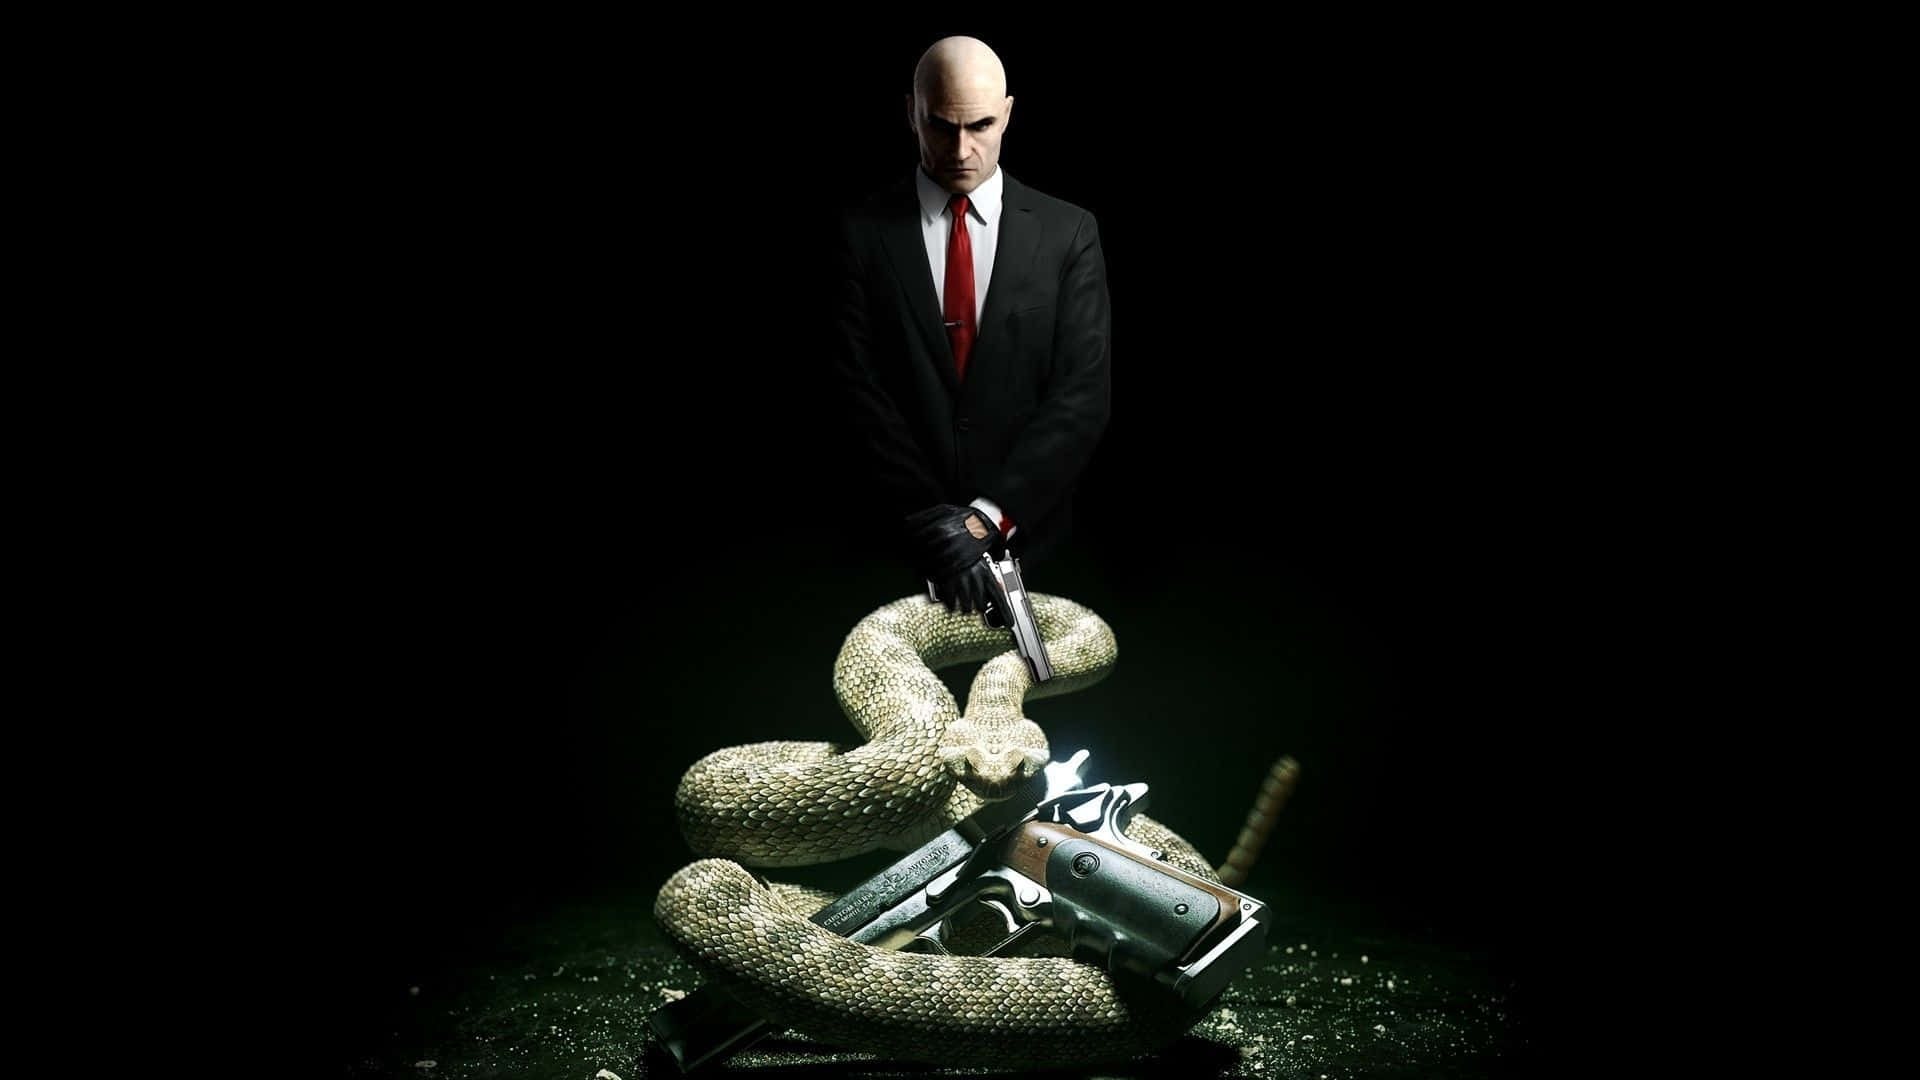 Get into character and become a cold-blooded assassin with Hitman Absolution